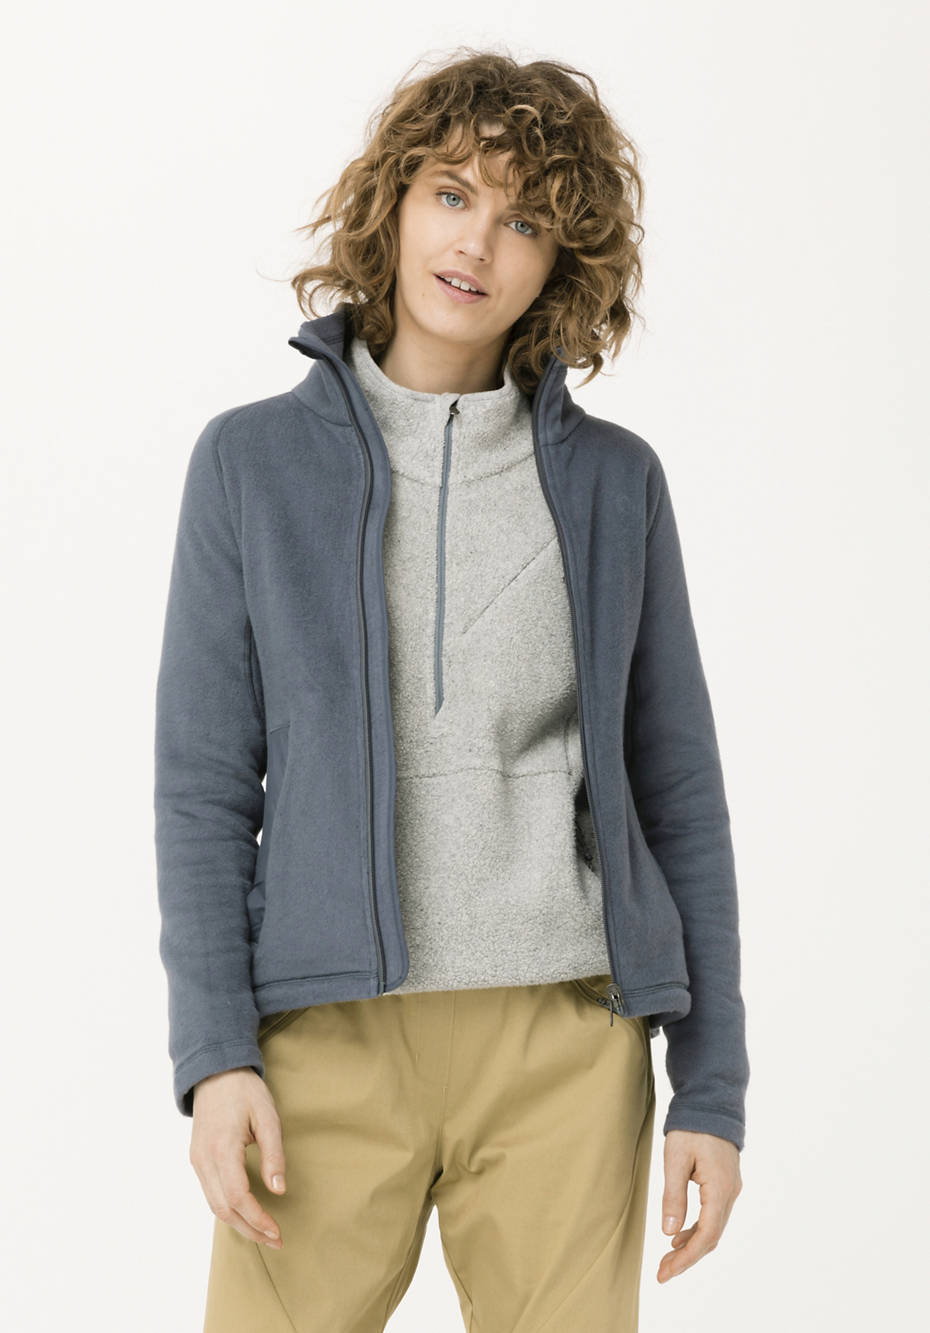 3-in-1 Nature Shell jacket made from pure organic cotton